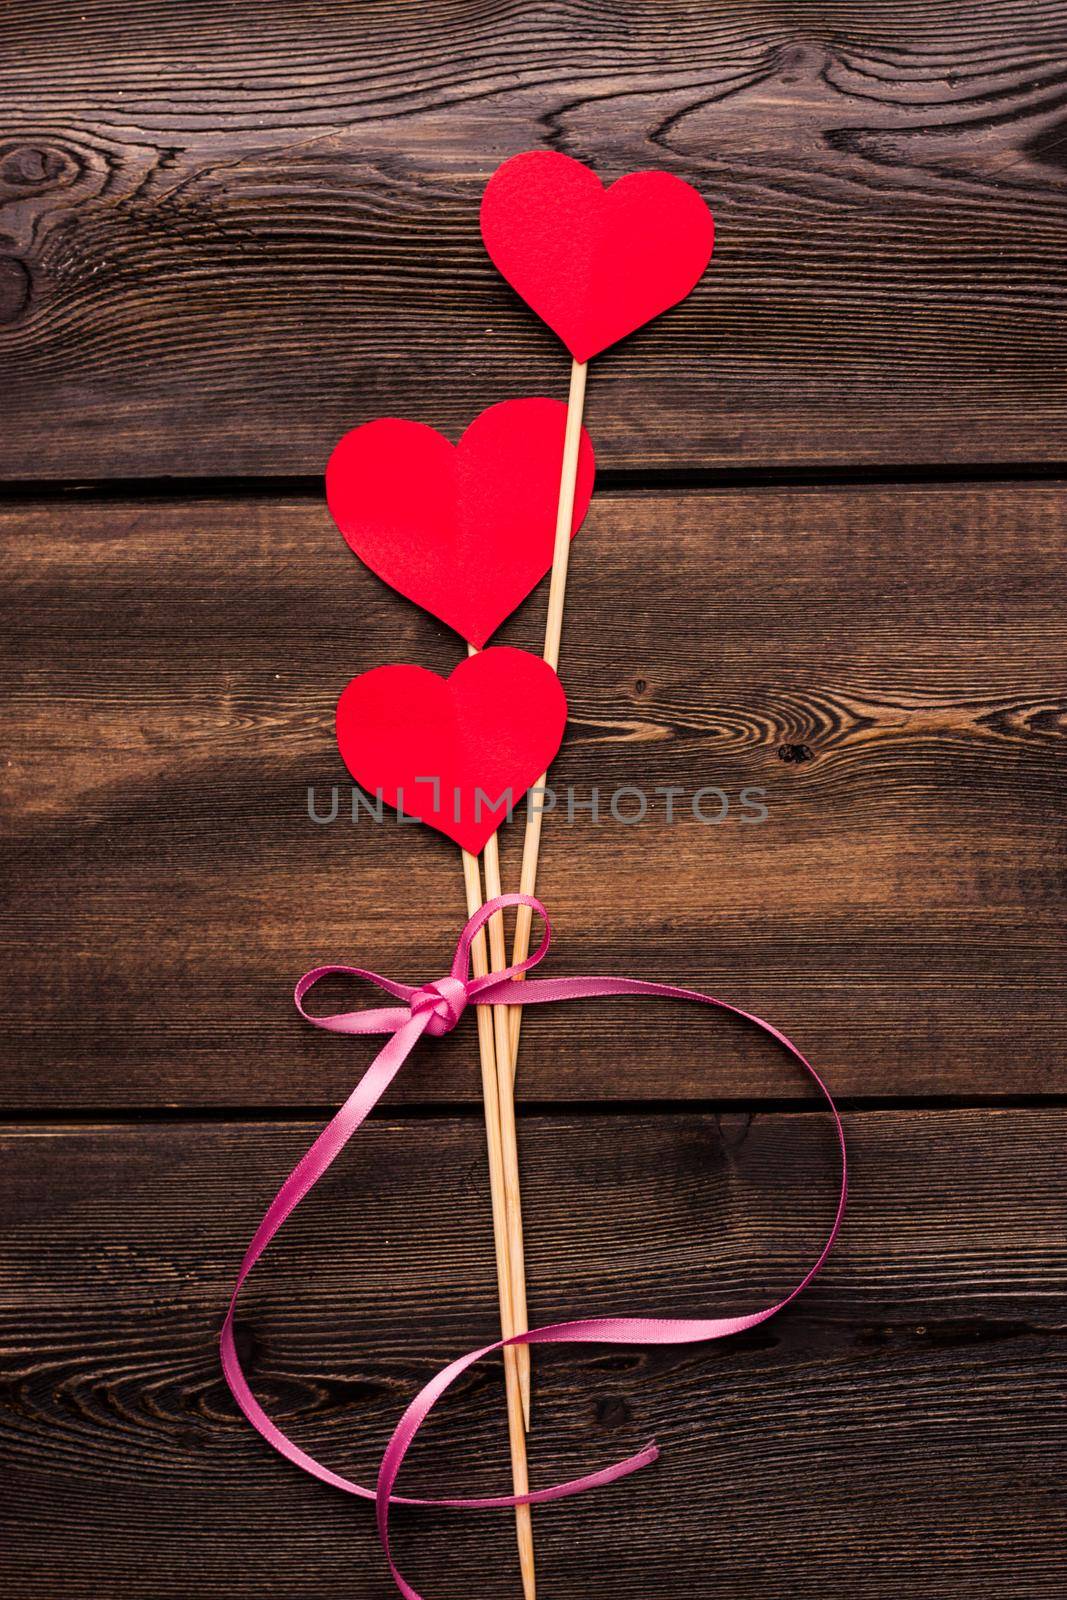 heart shaped flower gift holiday wooden background valentine by SHOTPRIME